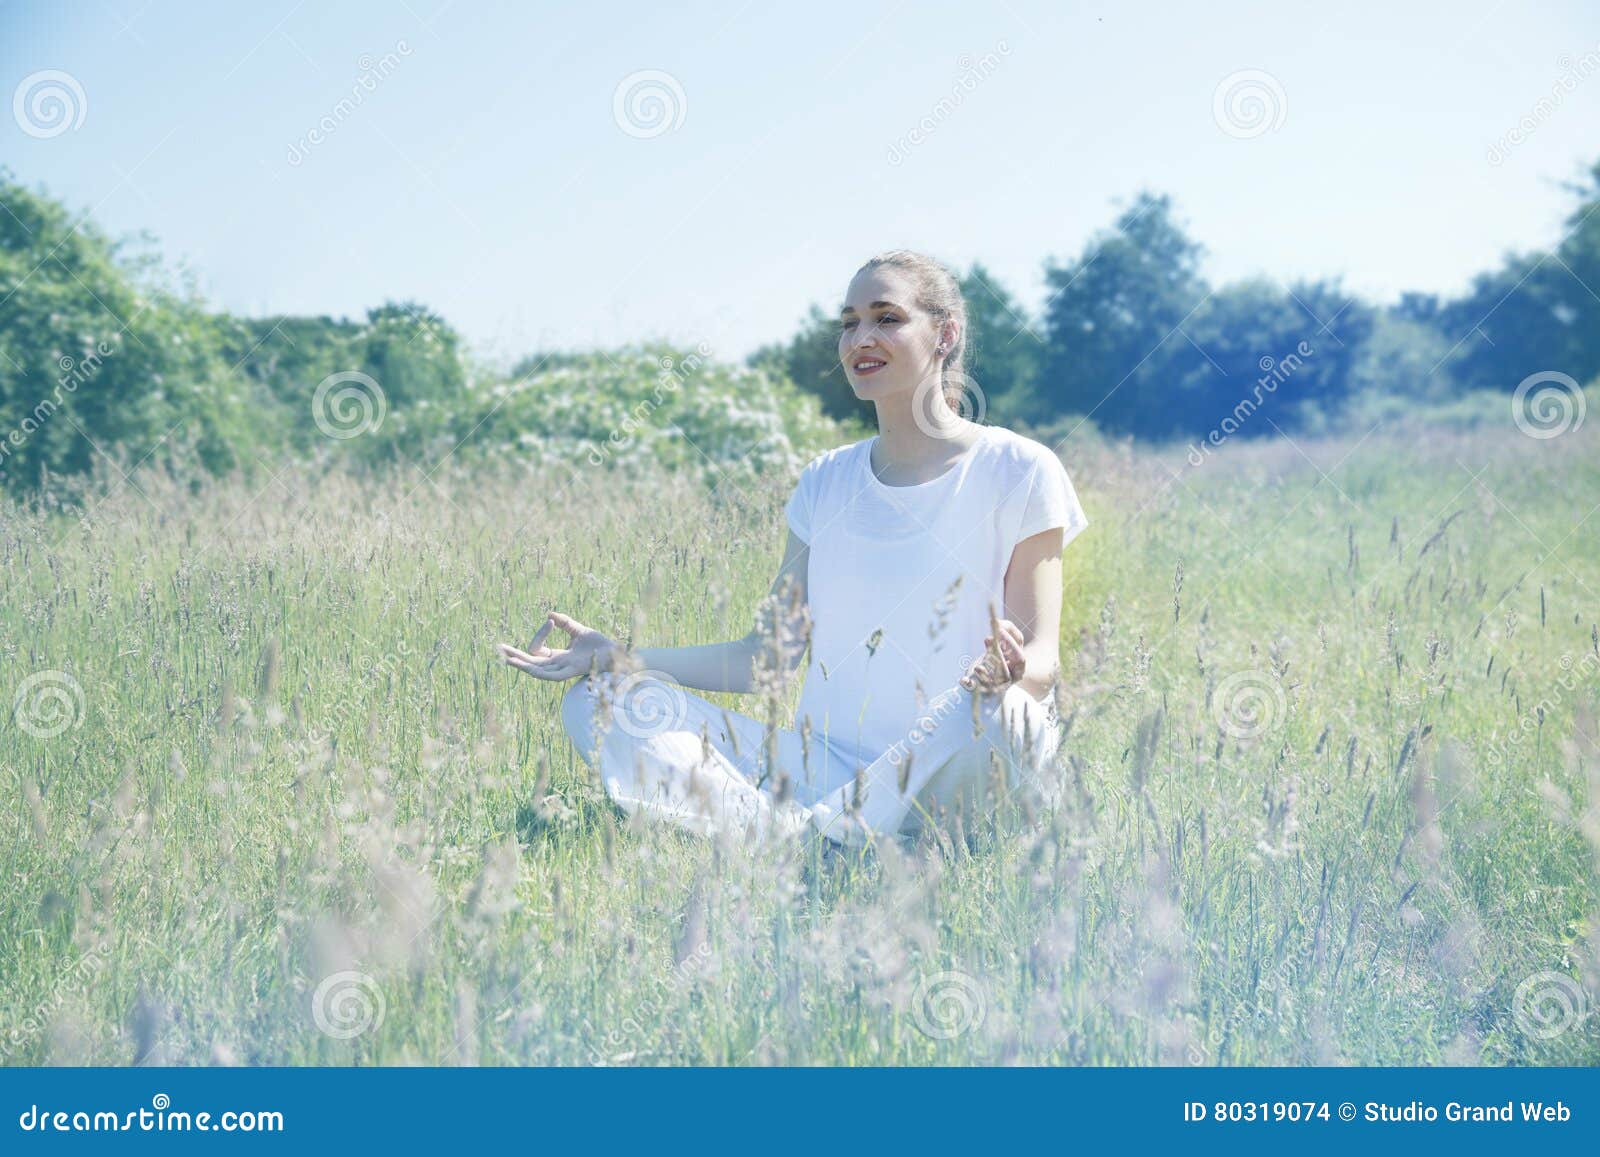 smiling beautiful yoga girl meditating for openness in green environment